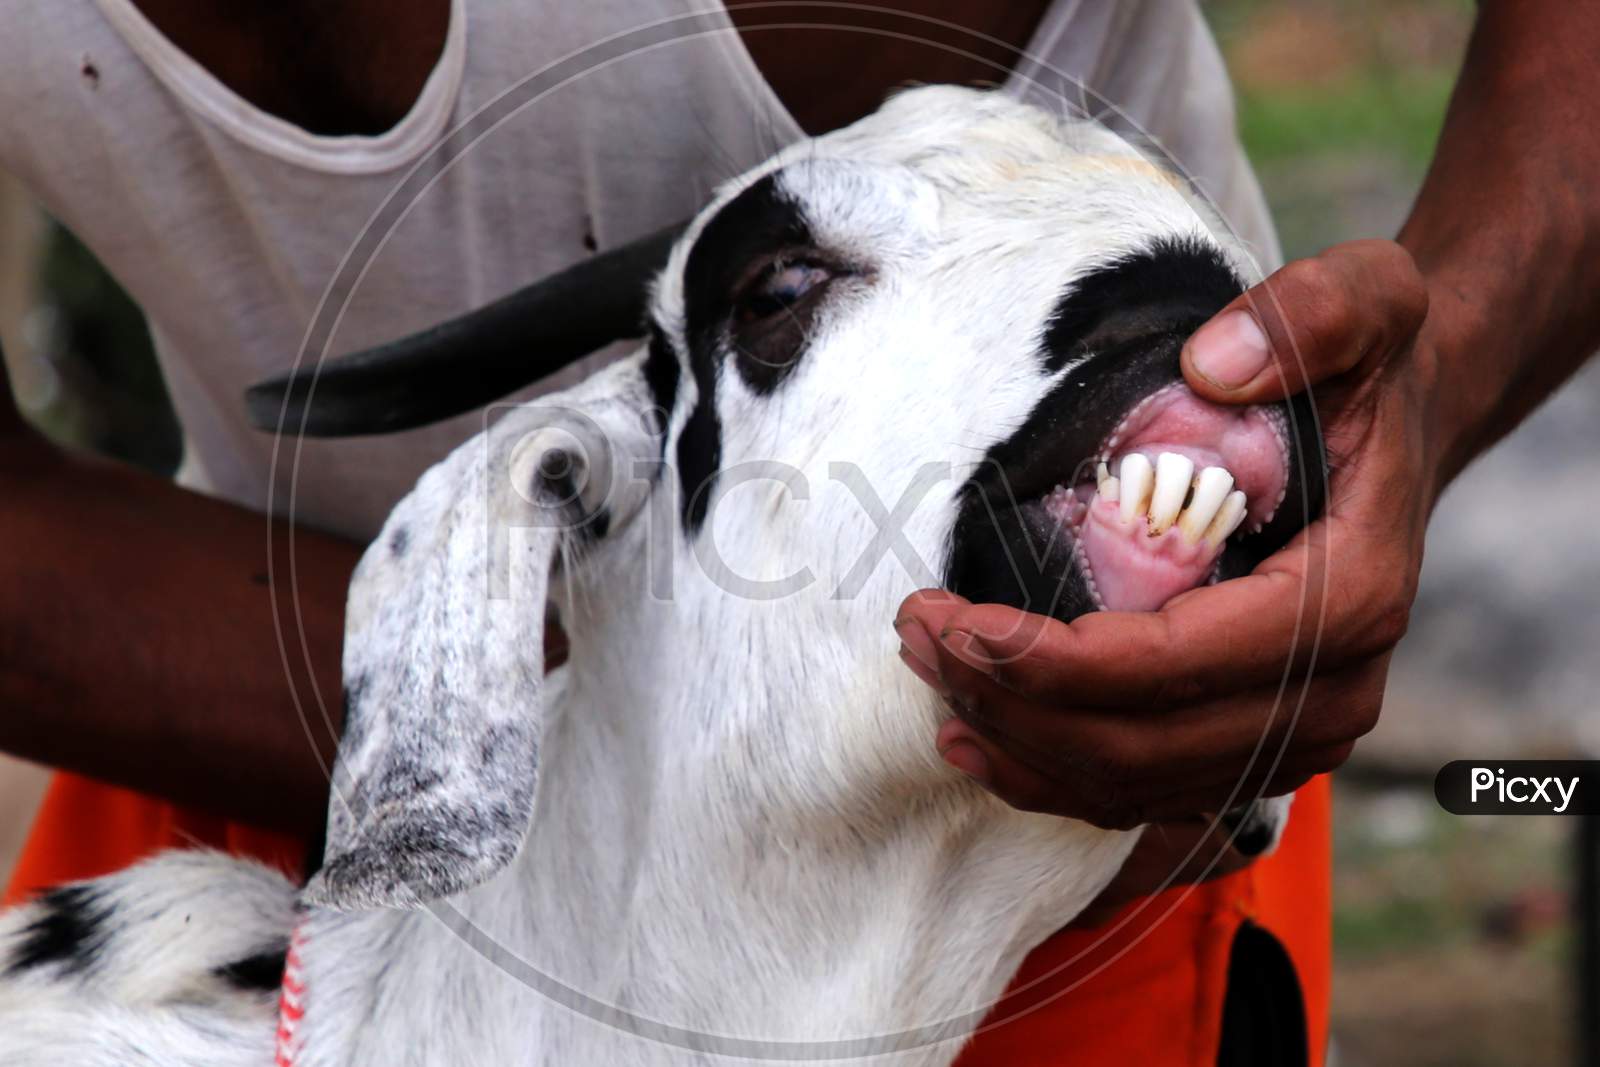 A Man Checks The Teeth Of A Goat To Determine Its Age At A Livestock Market Ahead Of The Muslim Festival Of Eid Al-Adha In Ajmer, India On July 23, 2020.